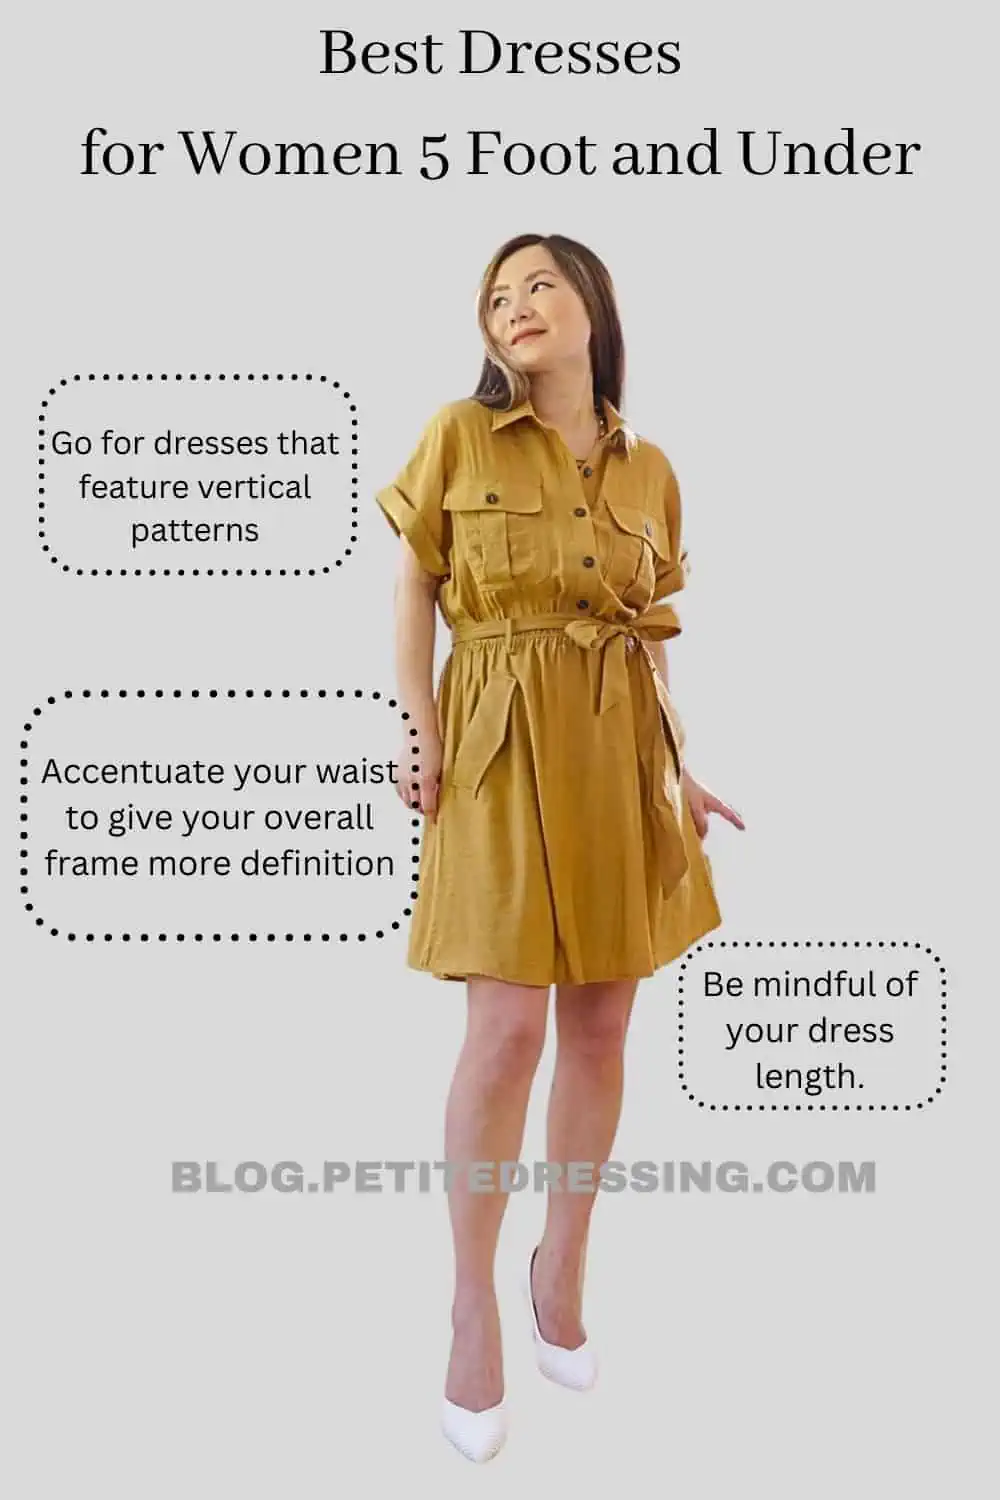 The Dress Style Guide for Women 5 Foot and under - Petite Dressing